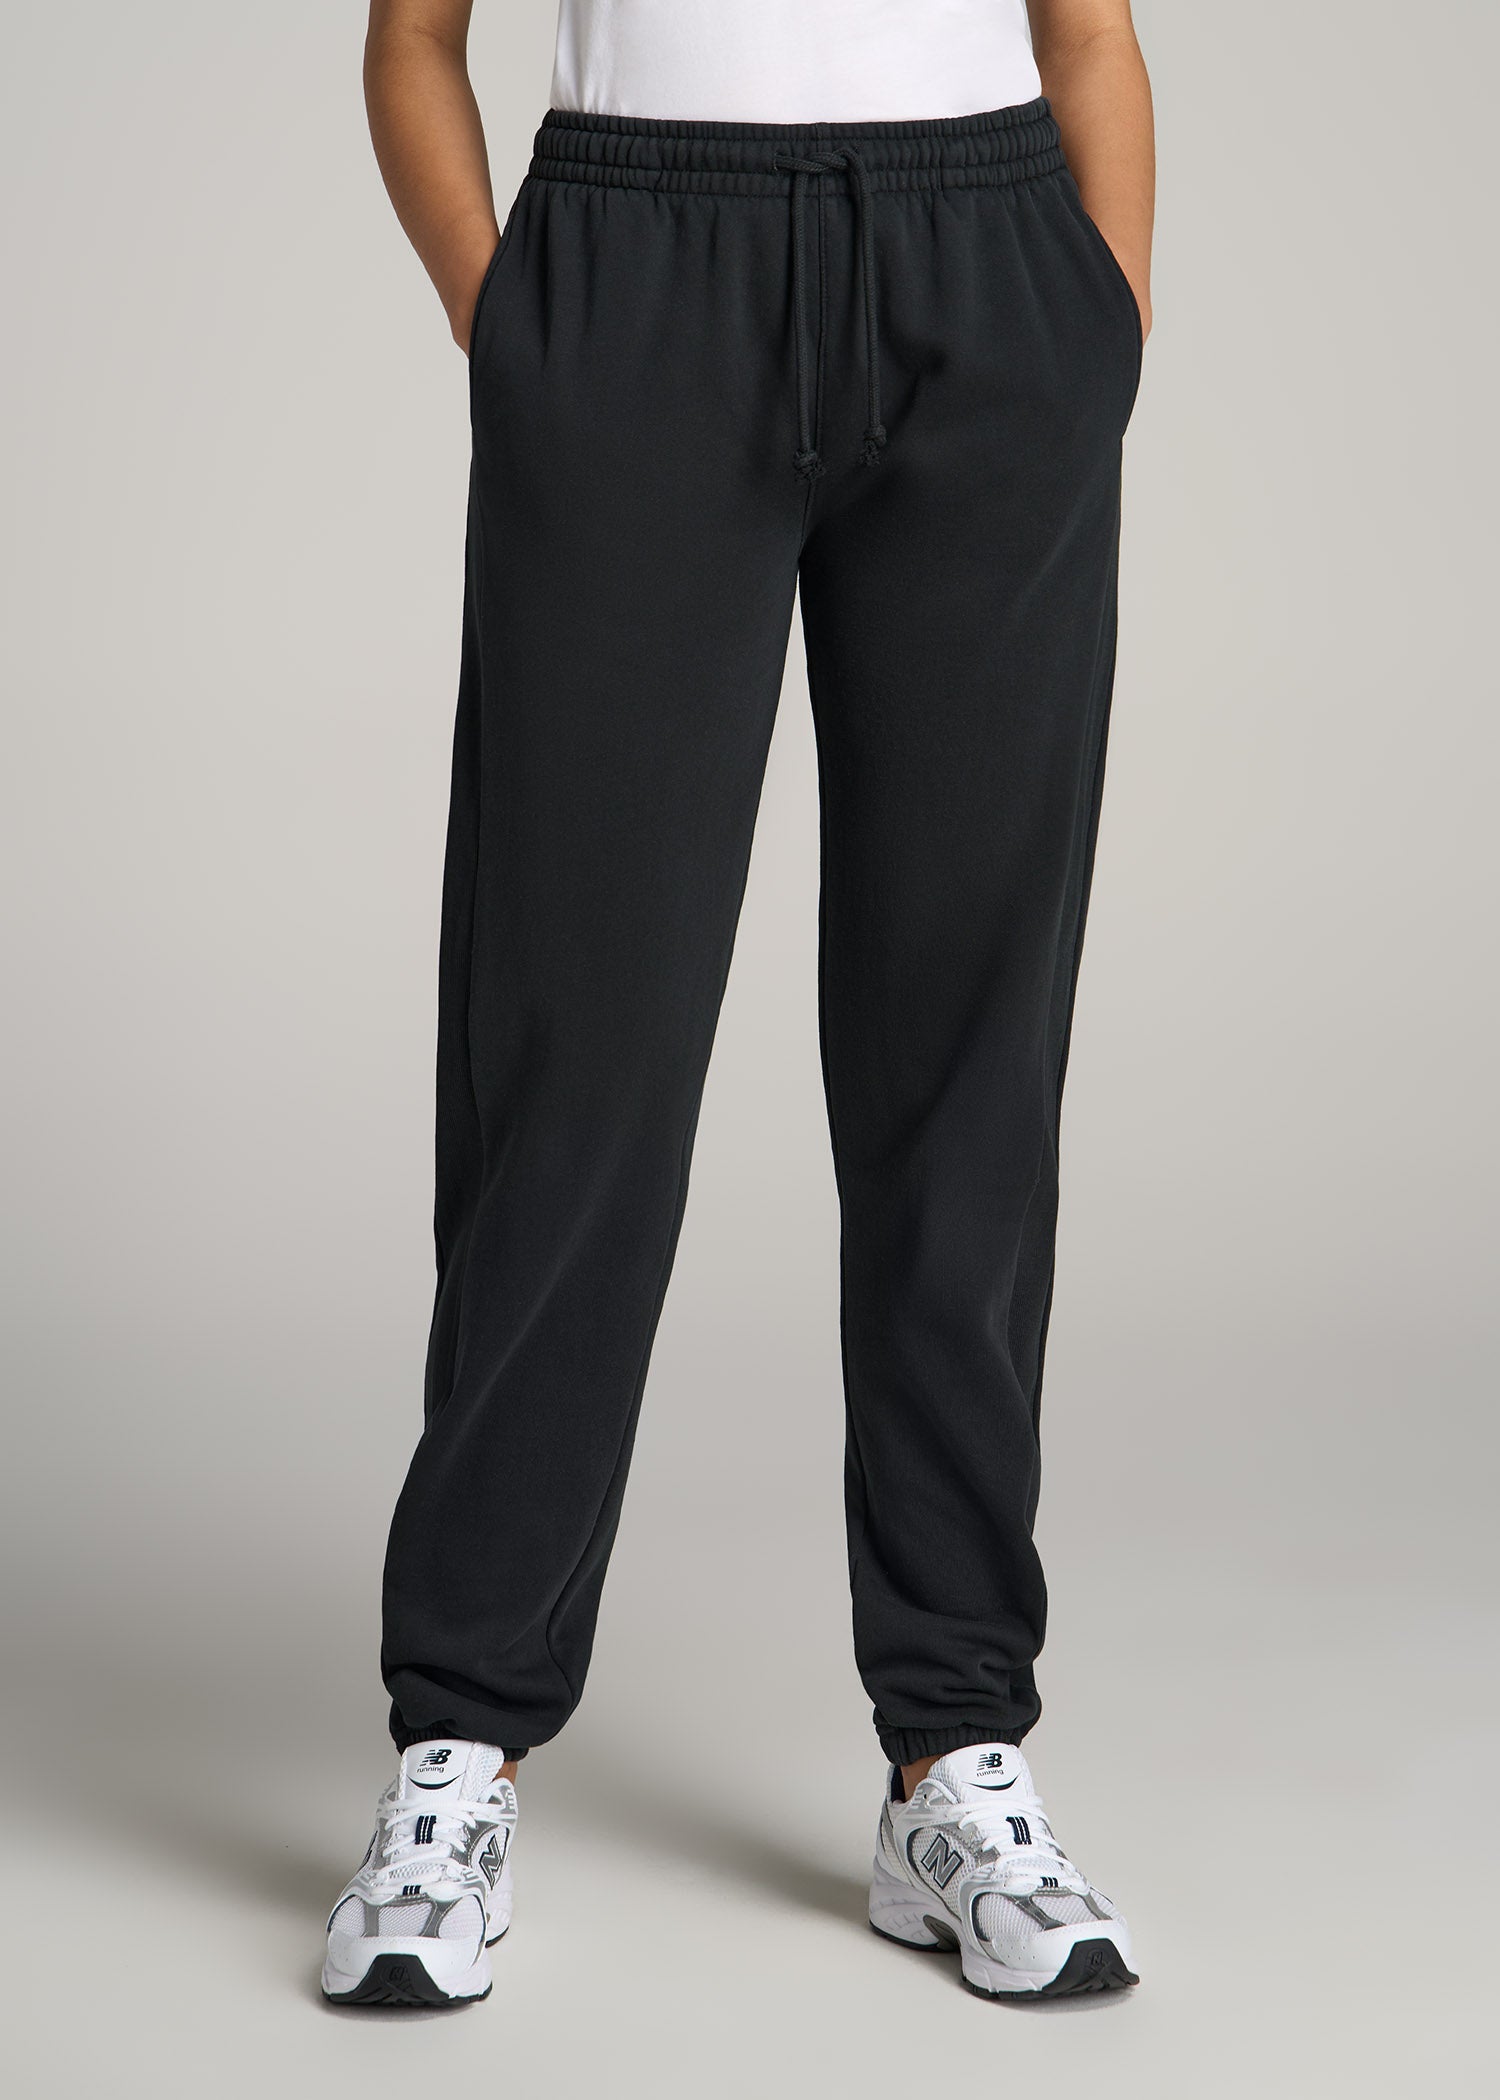 Black sweatpants women's tall spring and autumn new American style